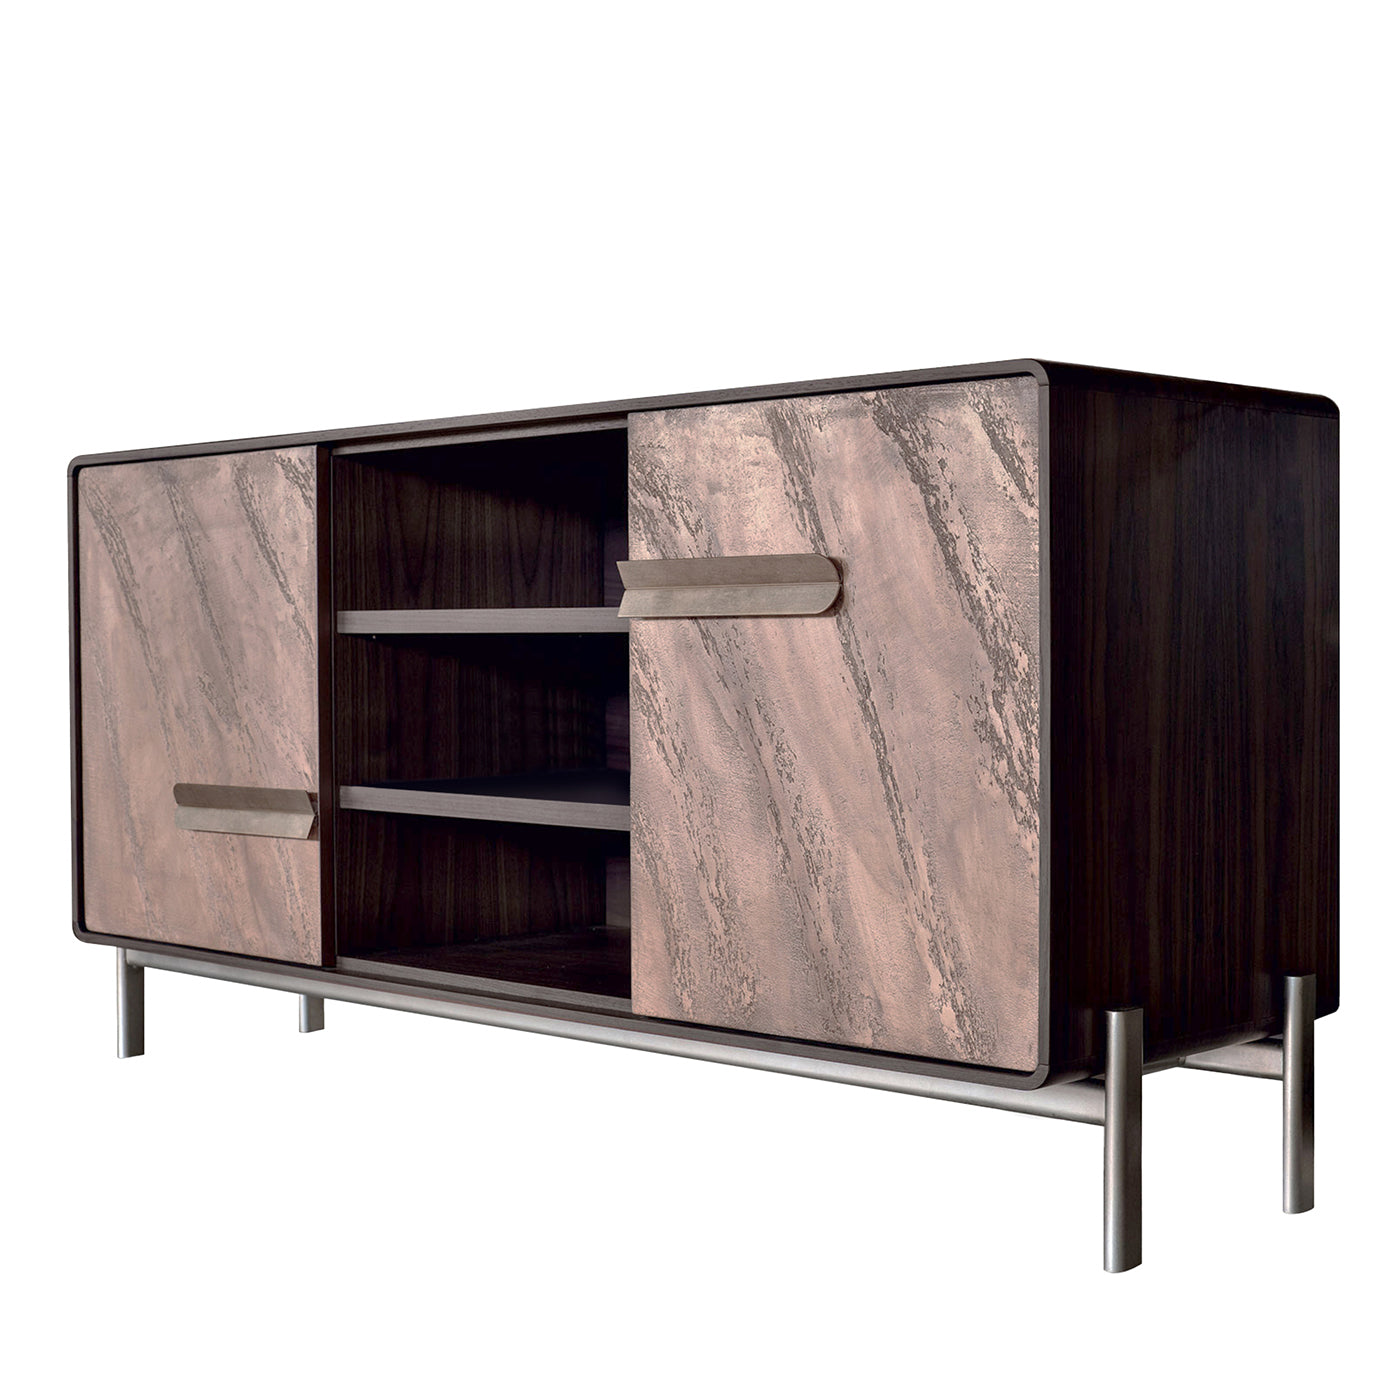 Perseo Canaletto Walnut Sideboard by Studio Archirivolto - Main view